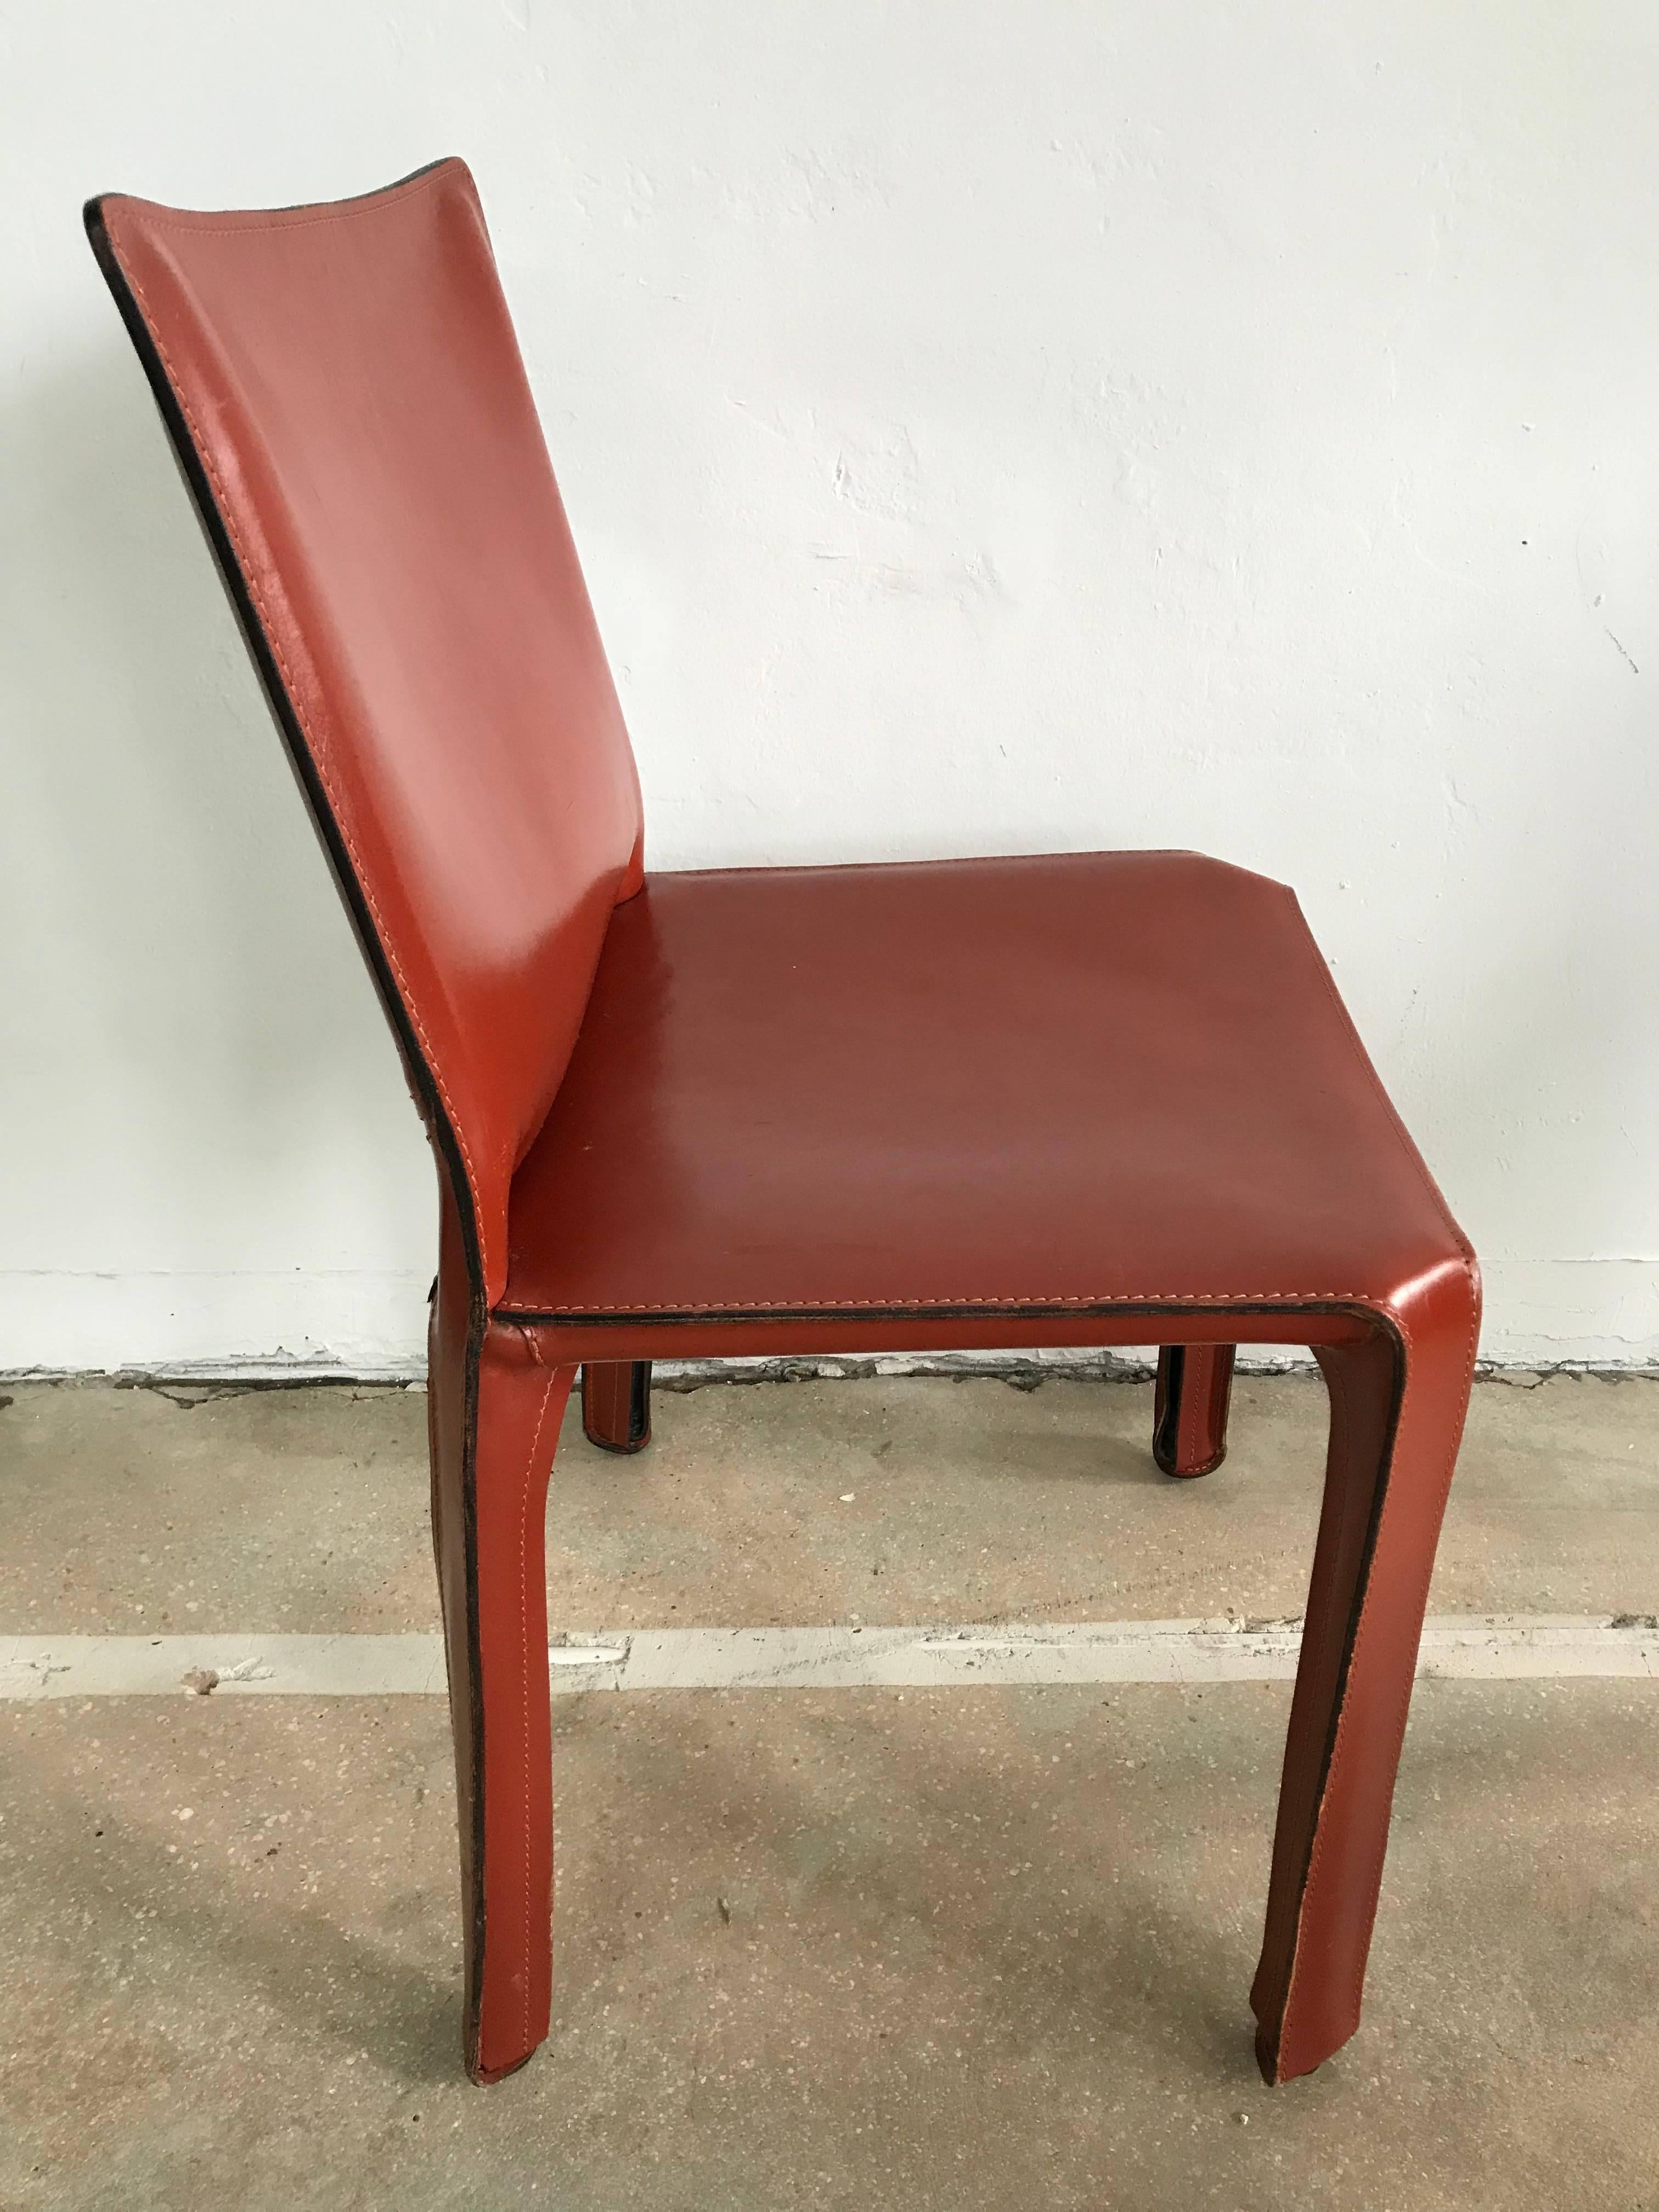 Leather Pair of Mario Bellini “Cab” Dining Chairs for Cassina